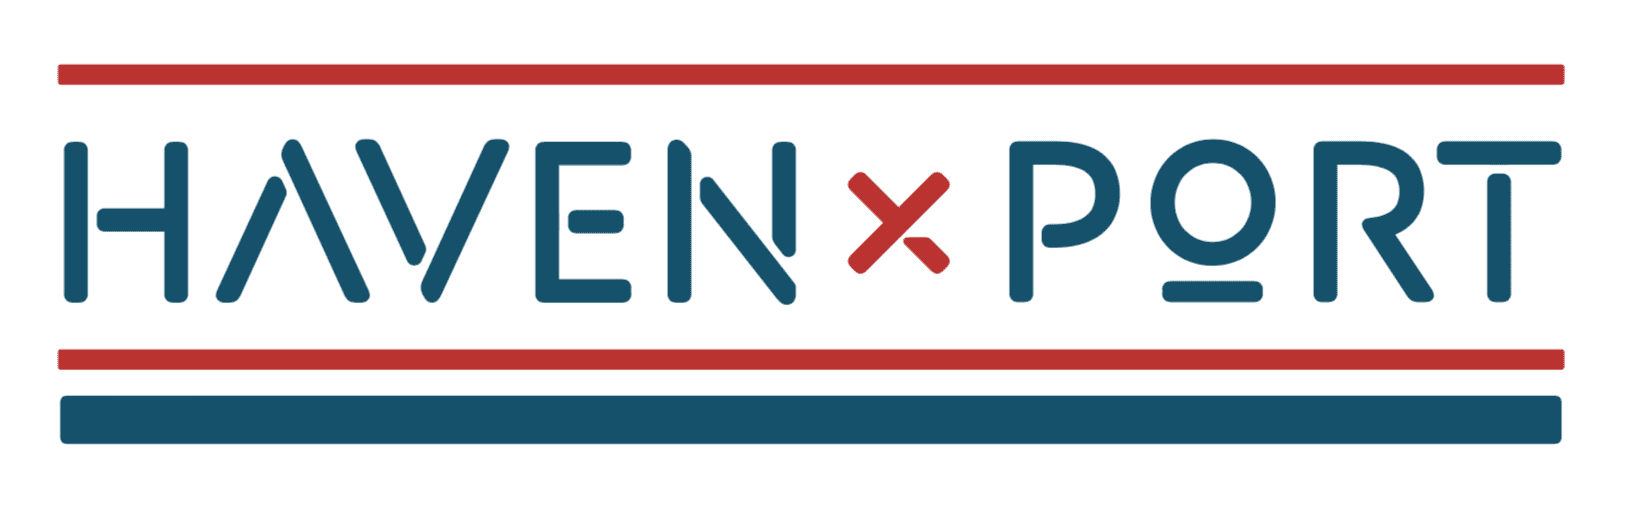 A red, white and blue logo for an open plan.